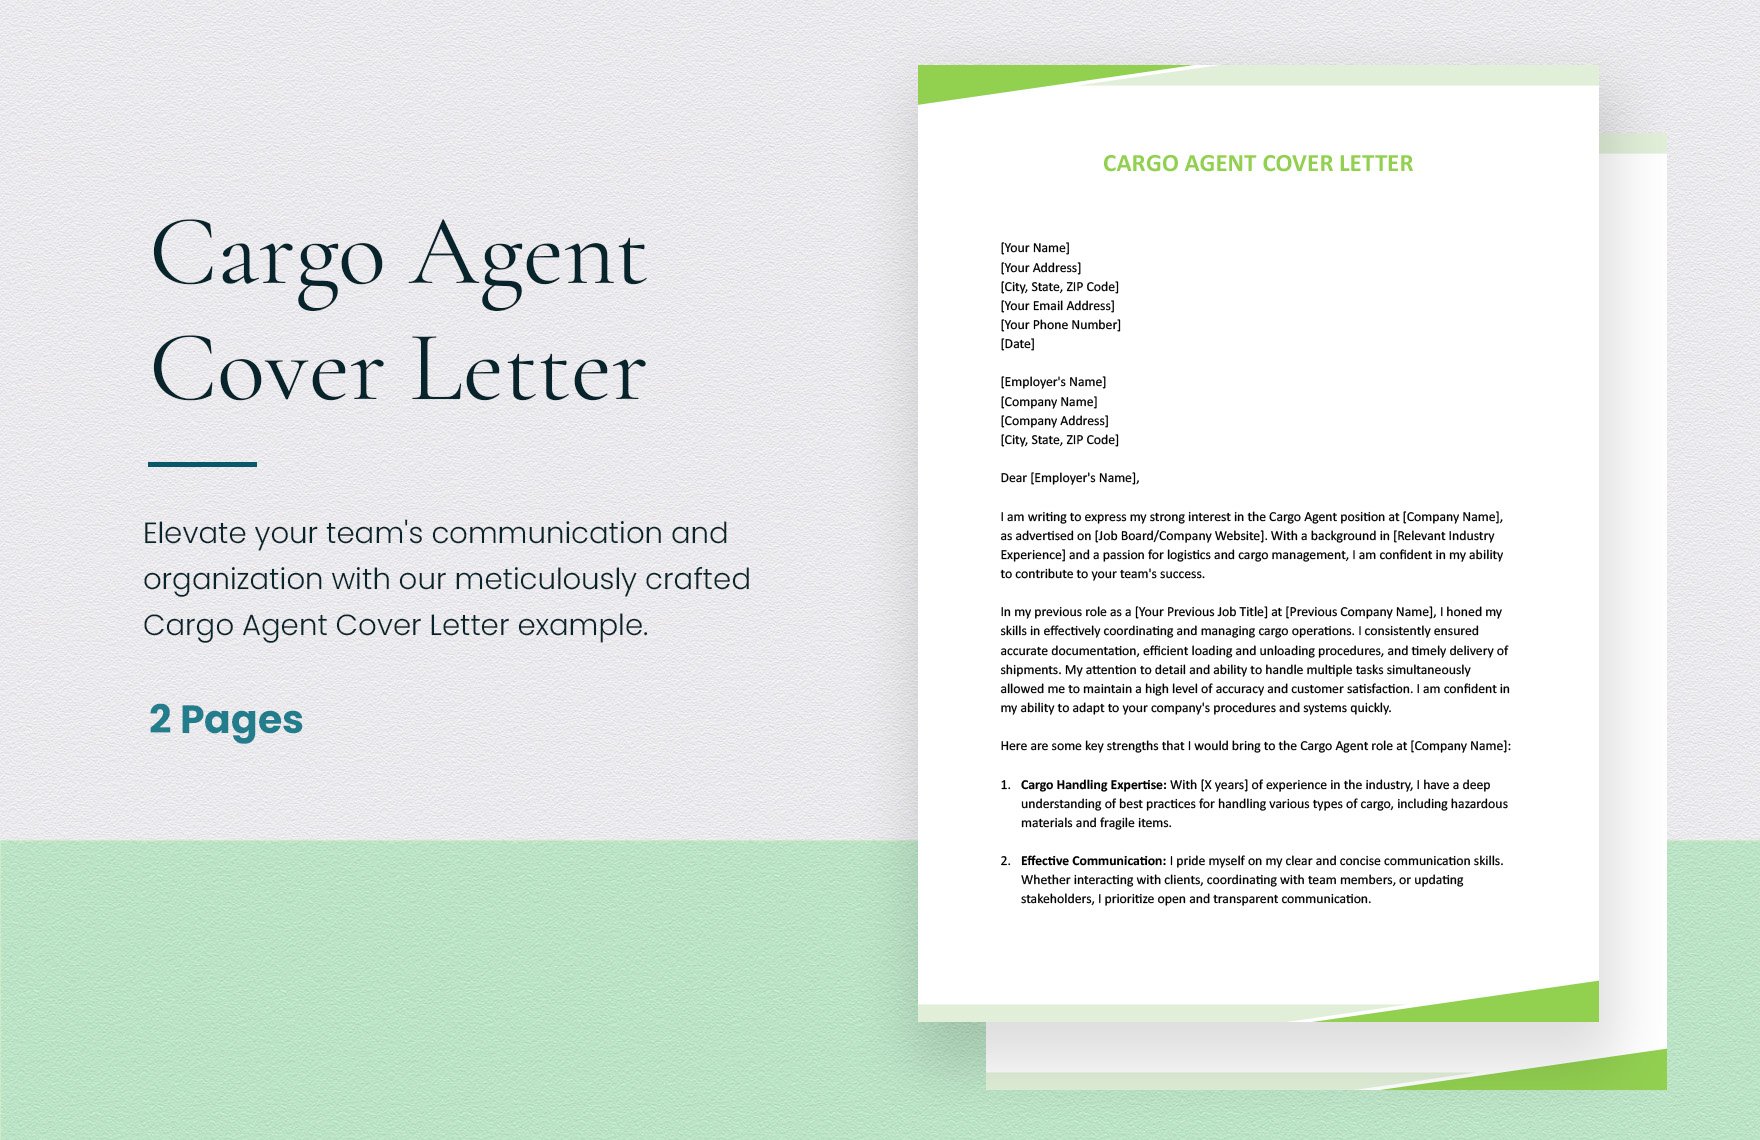 Cargo Agent Cover Letter